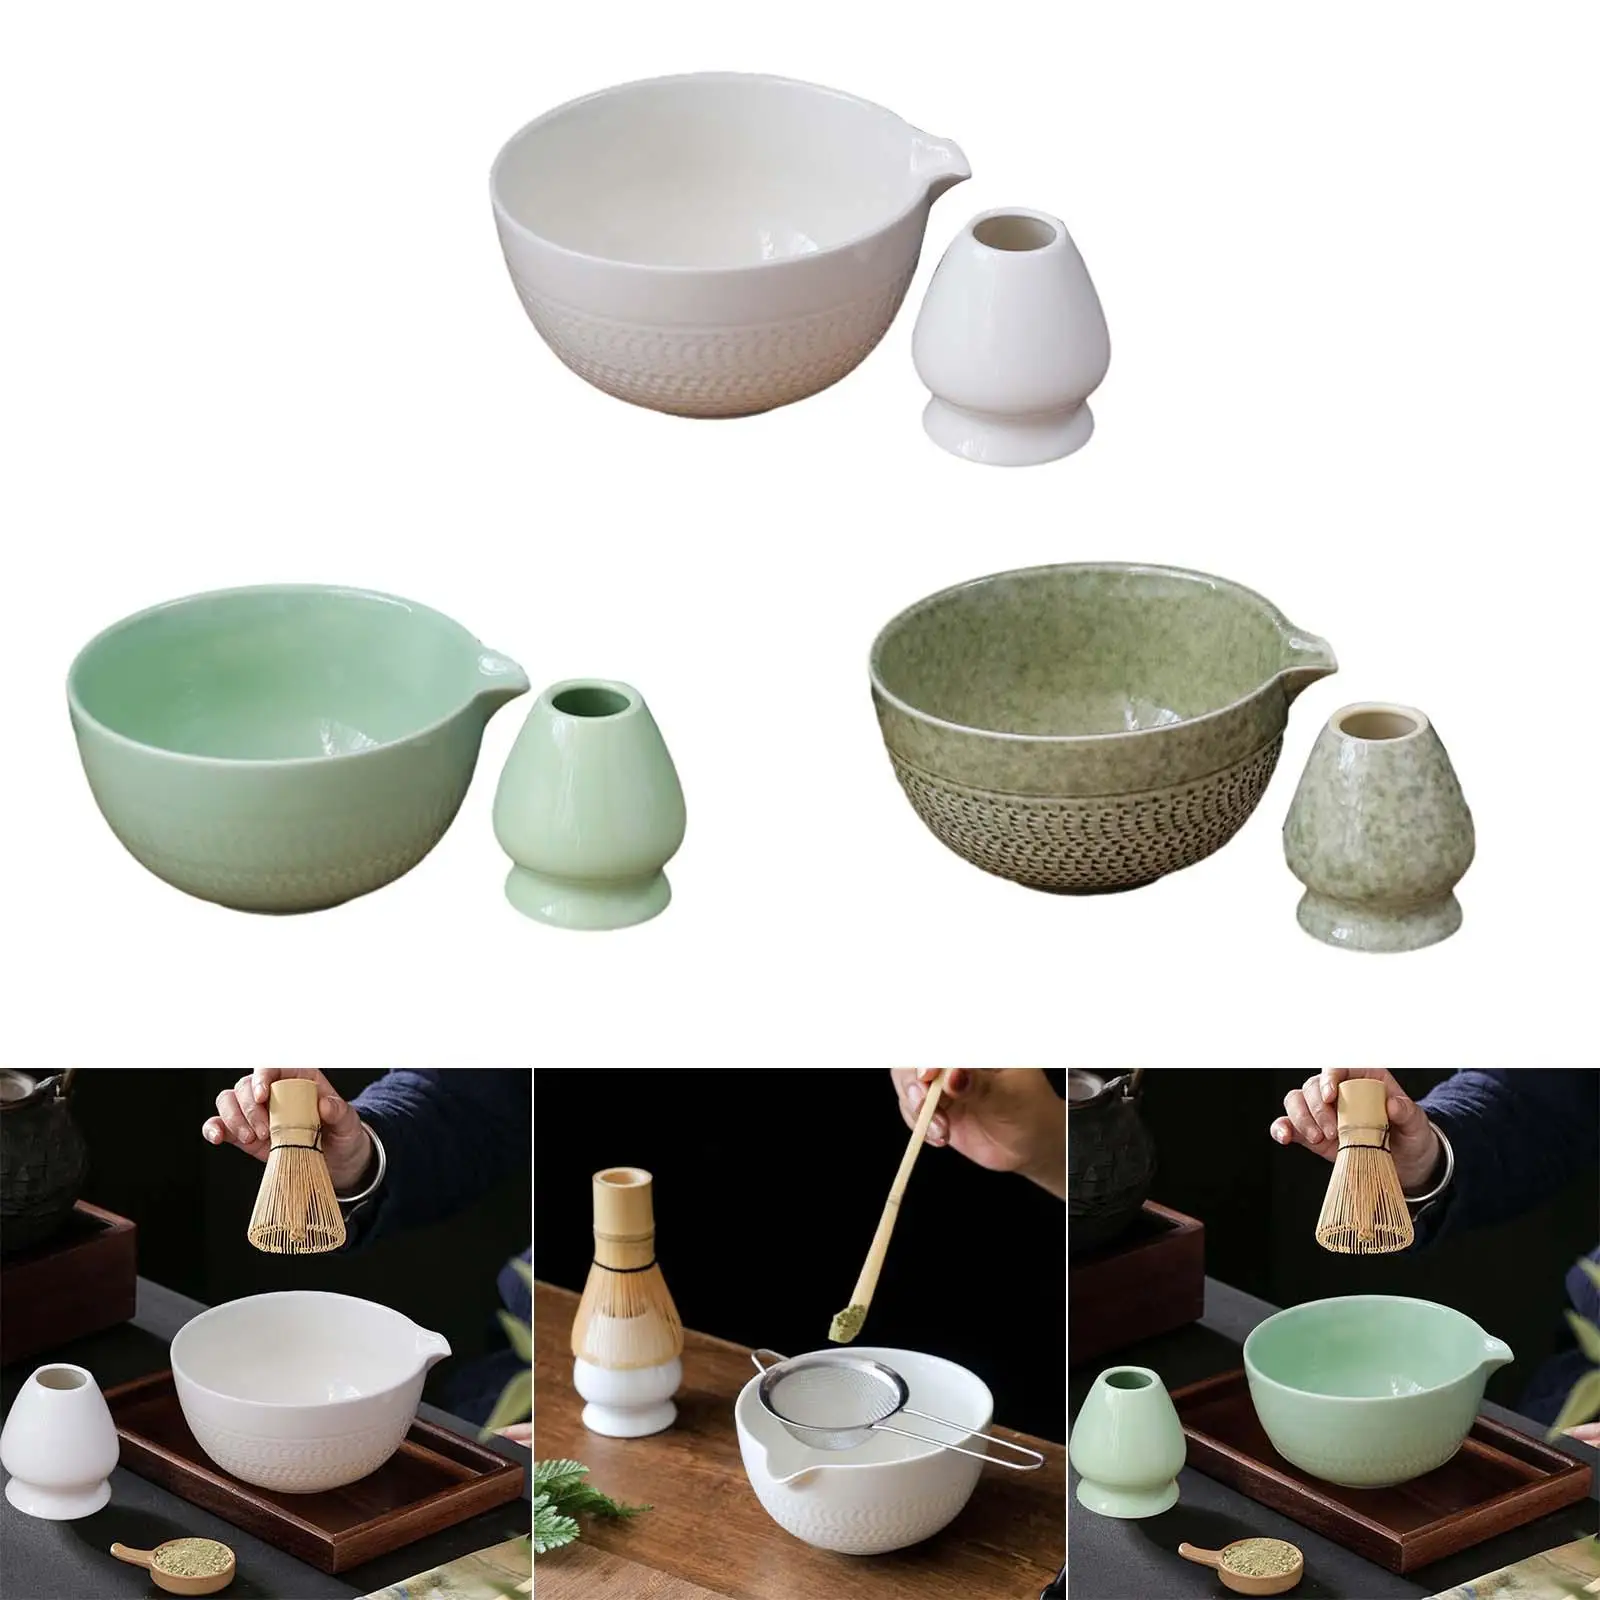 2Pcs Traditional Matcha Bowl with Whisk Holder Whisk Tea Bowl Handmade Matcha Ceremony for Table Dining Room Party Home Gift